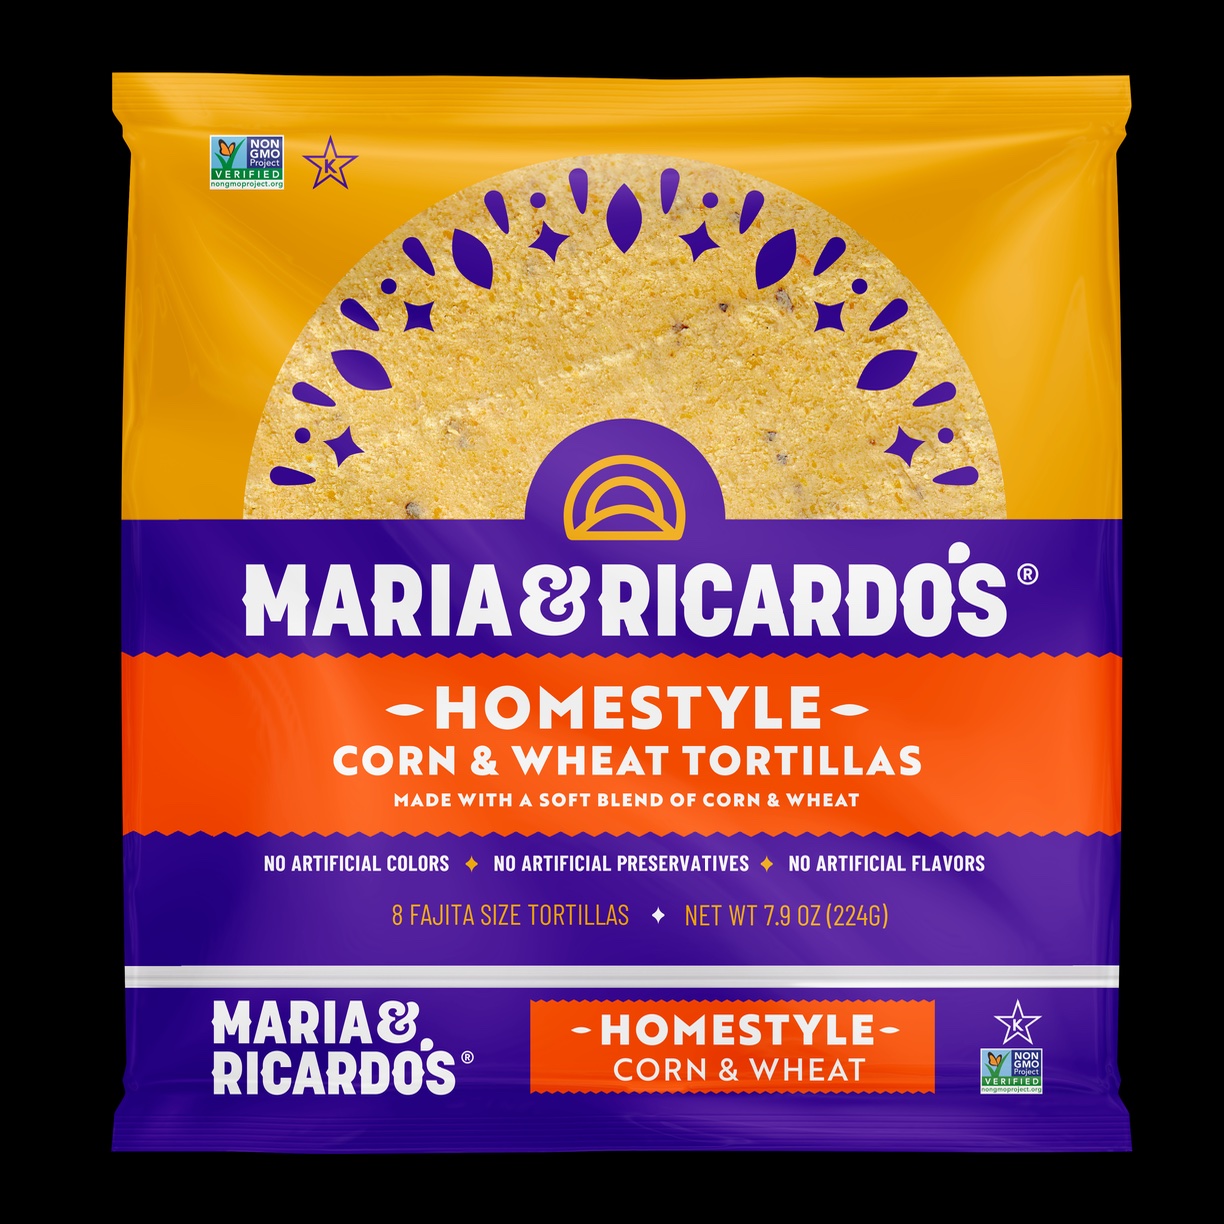 Maria and Ricardo’s New Packaging Features A Heritage-Driven Brand Identity